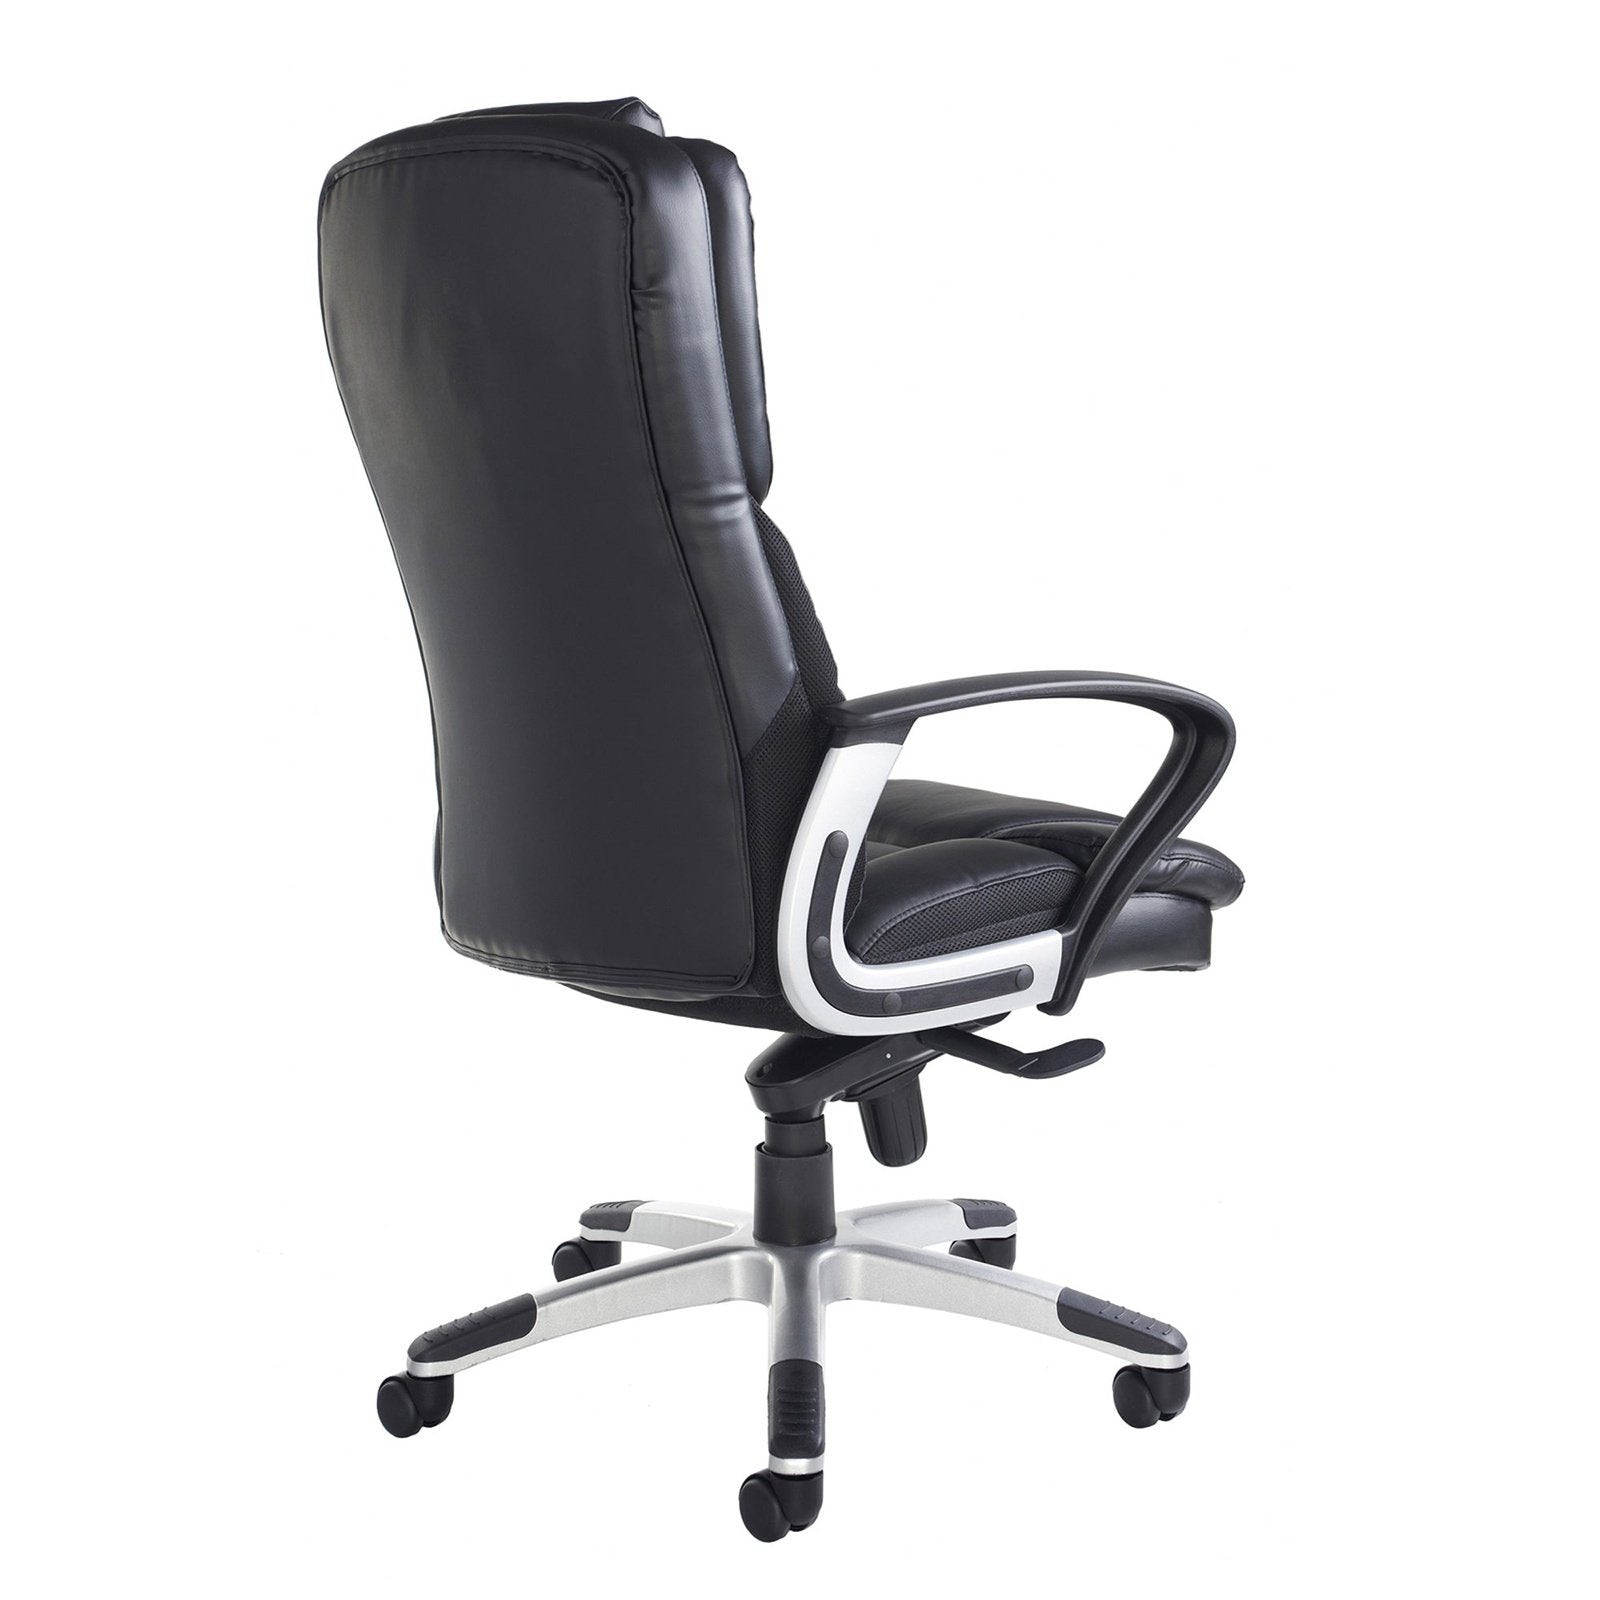 Palermo high back executive chair - black faux leather - Office Products Online